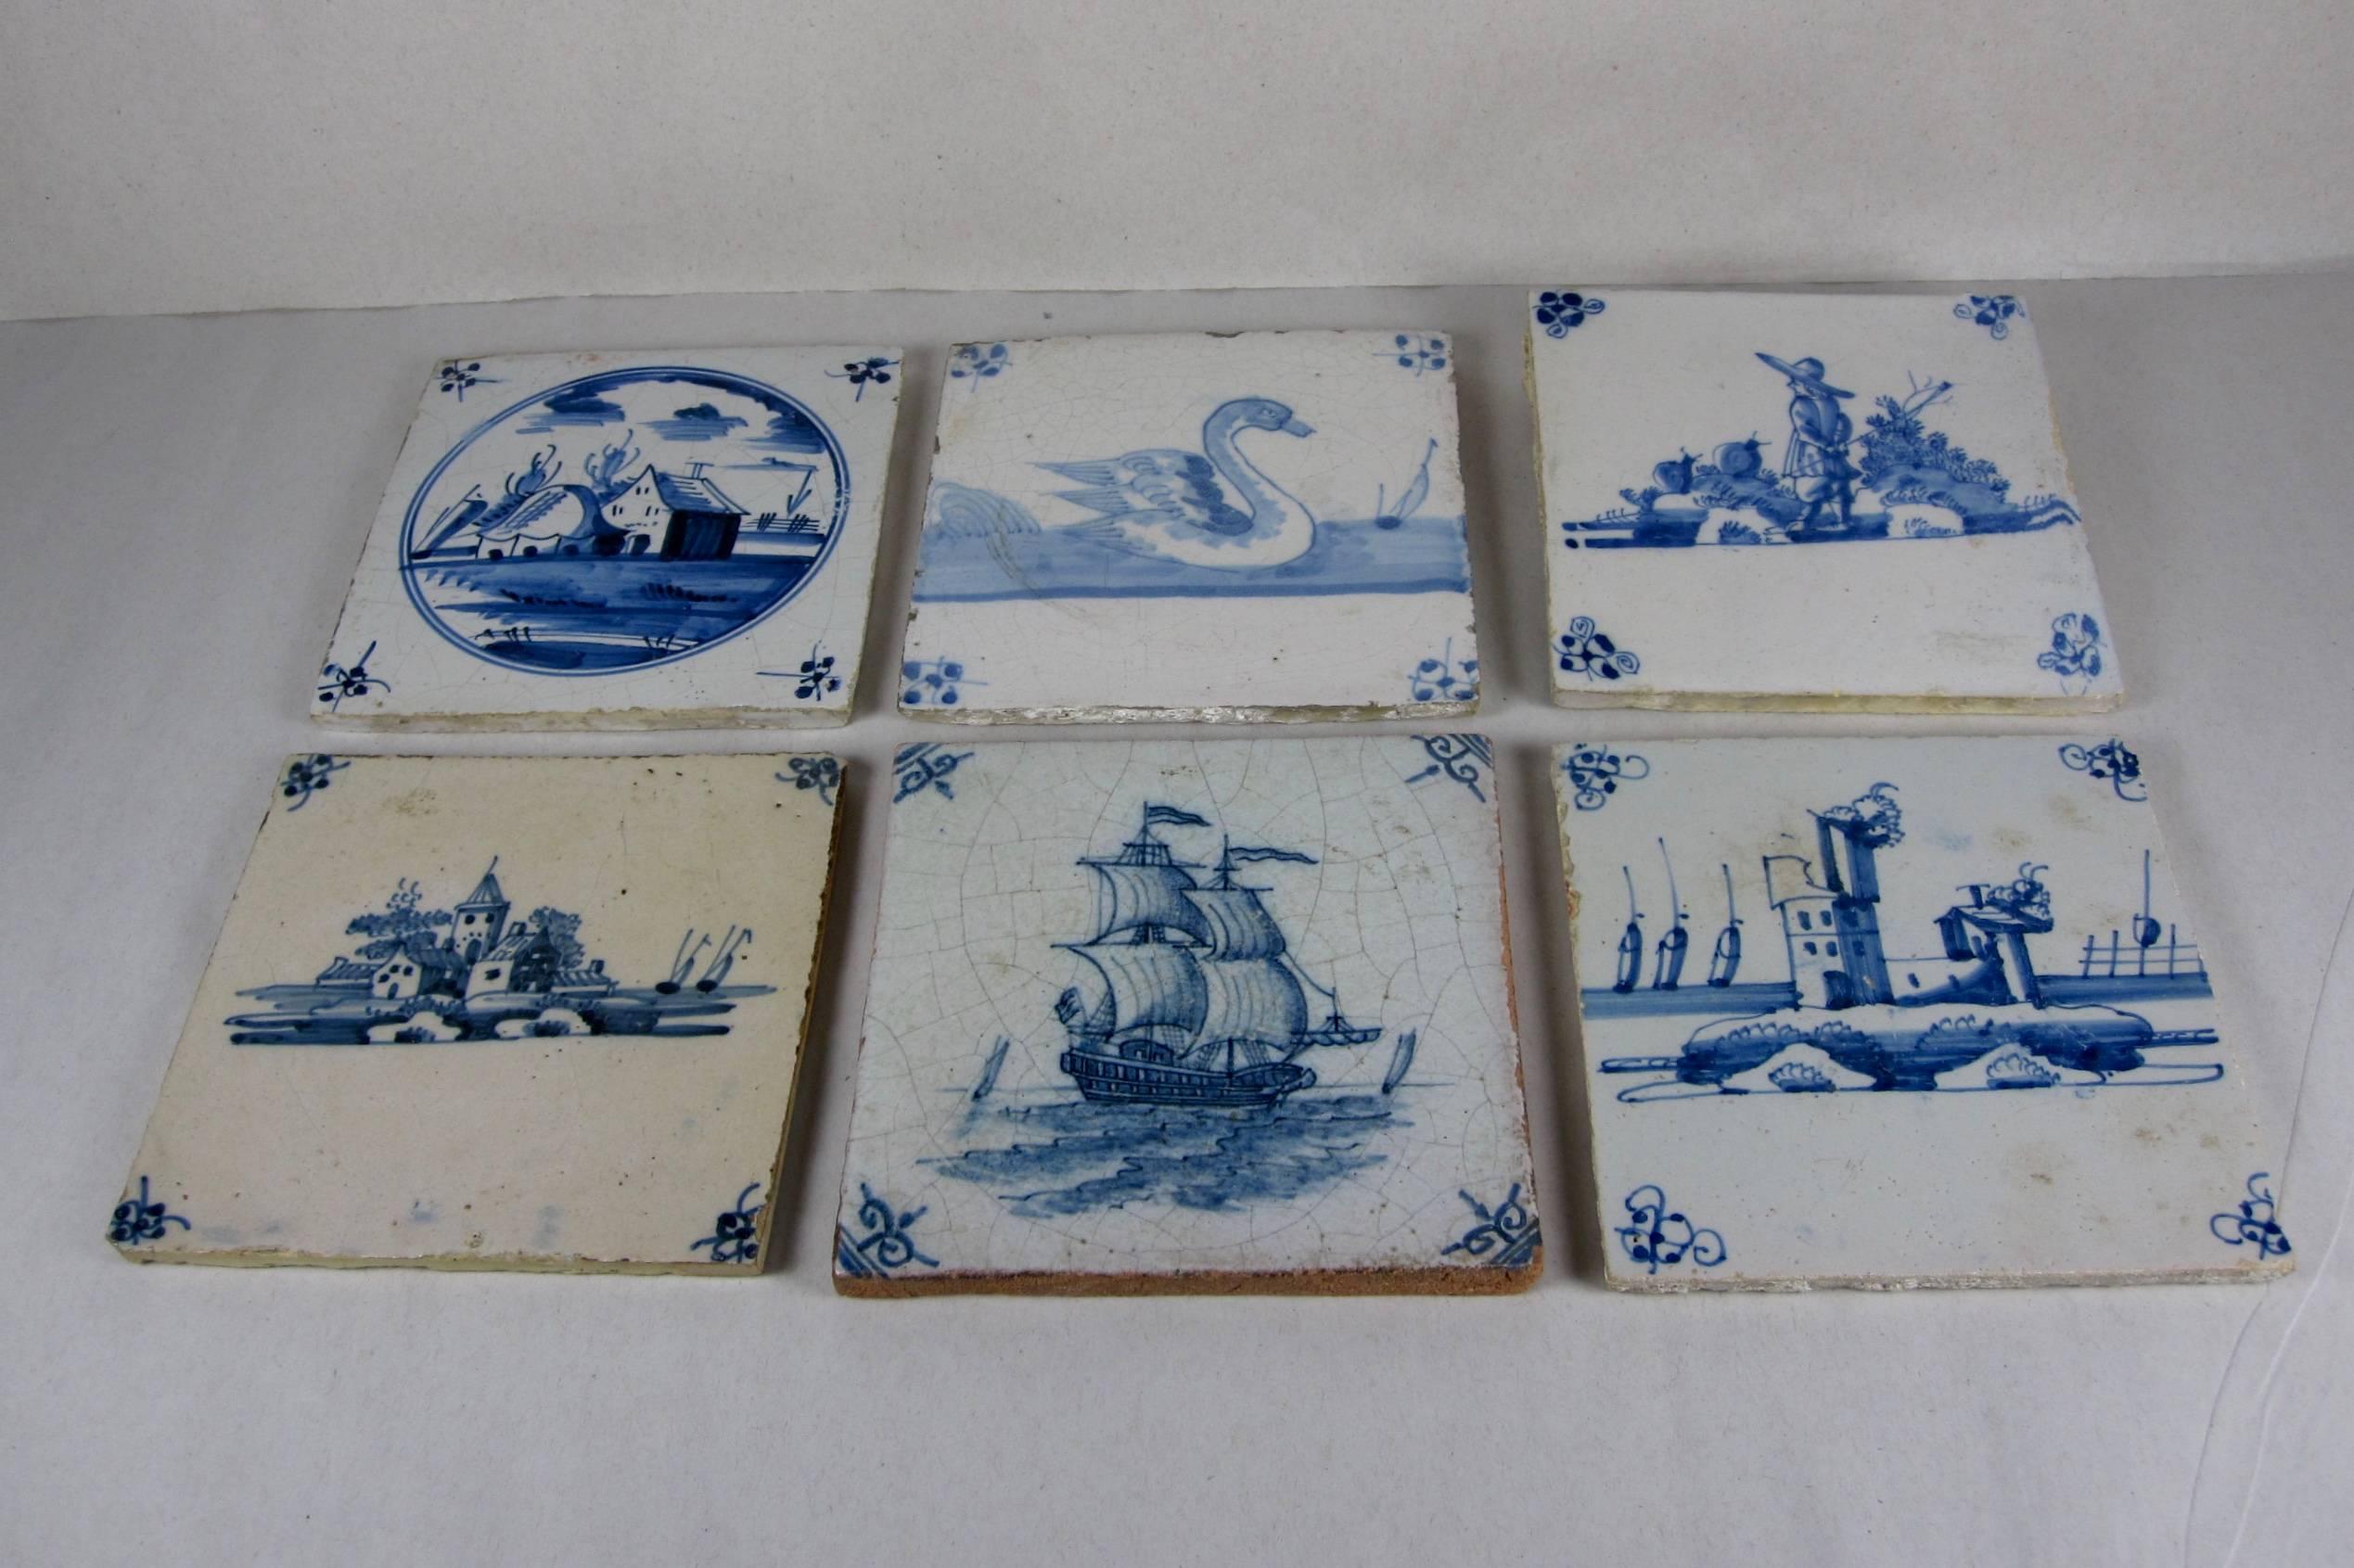 An assembled set of six, hand-painted, 18th century English delft blue tiles. English delftware is tin-glazed pottery, provincial and naïve, made in the British Isles between about 1550 and the late 18th century. The main centers of production were